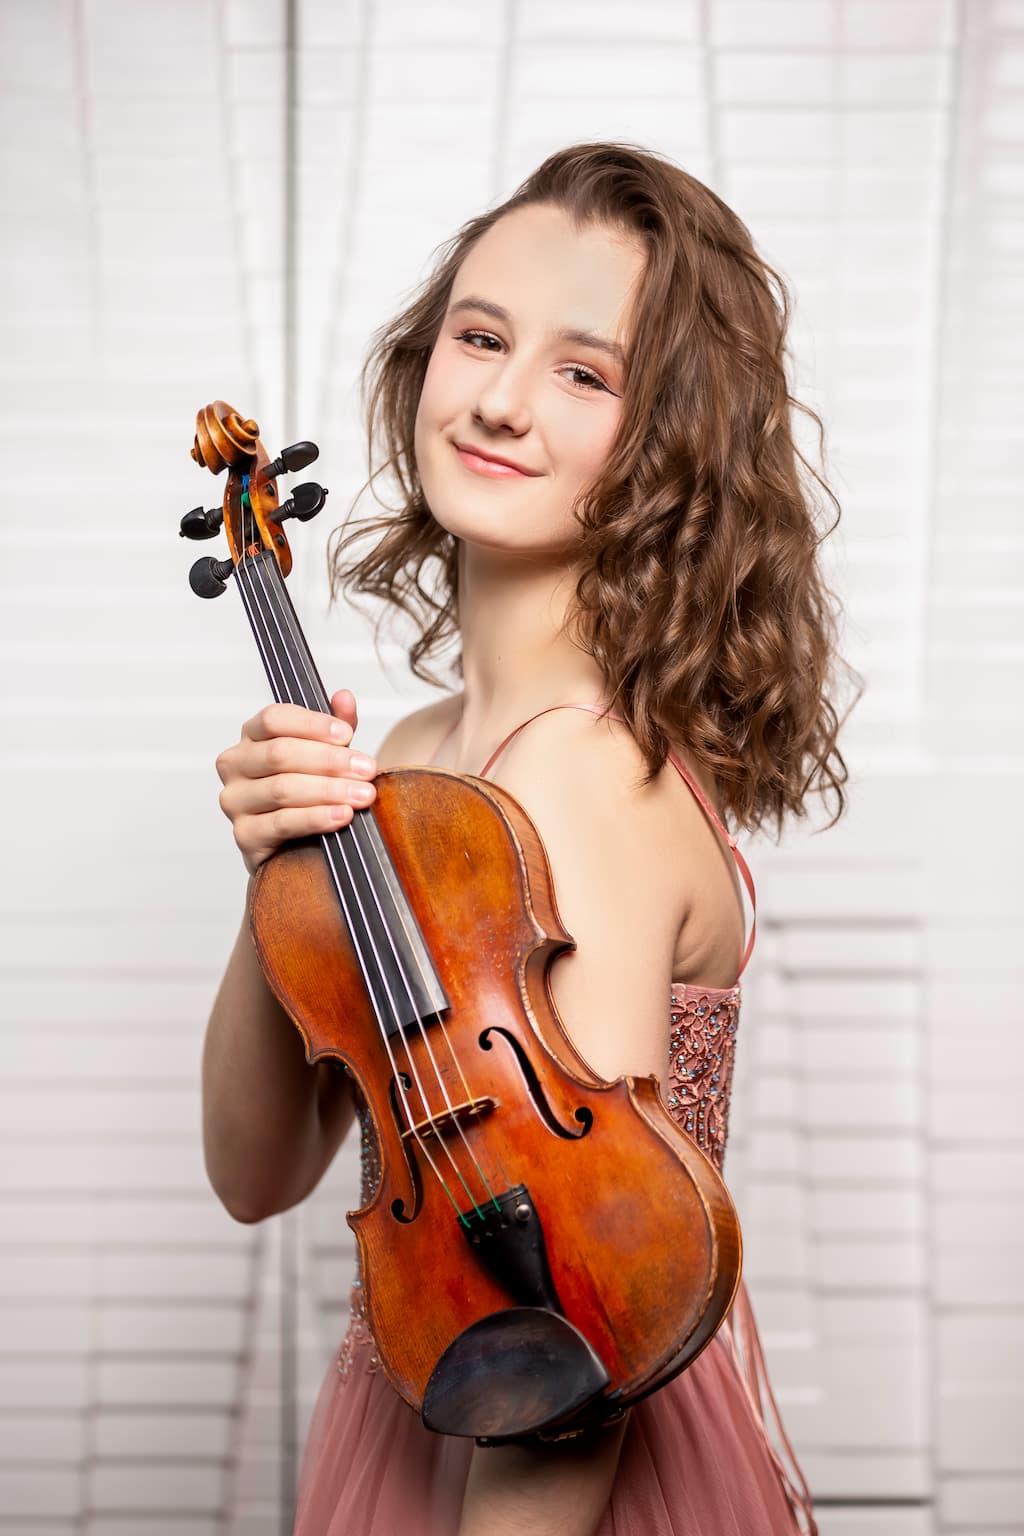 Anna Stube is holding a violin and looking towards the camera smiling